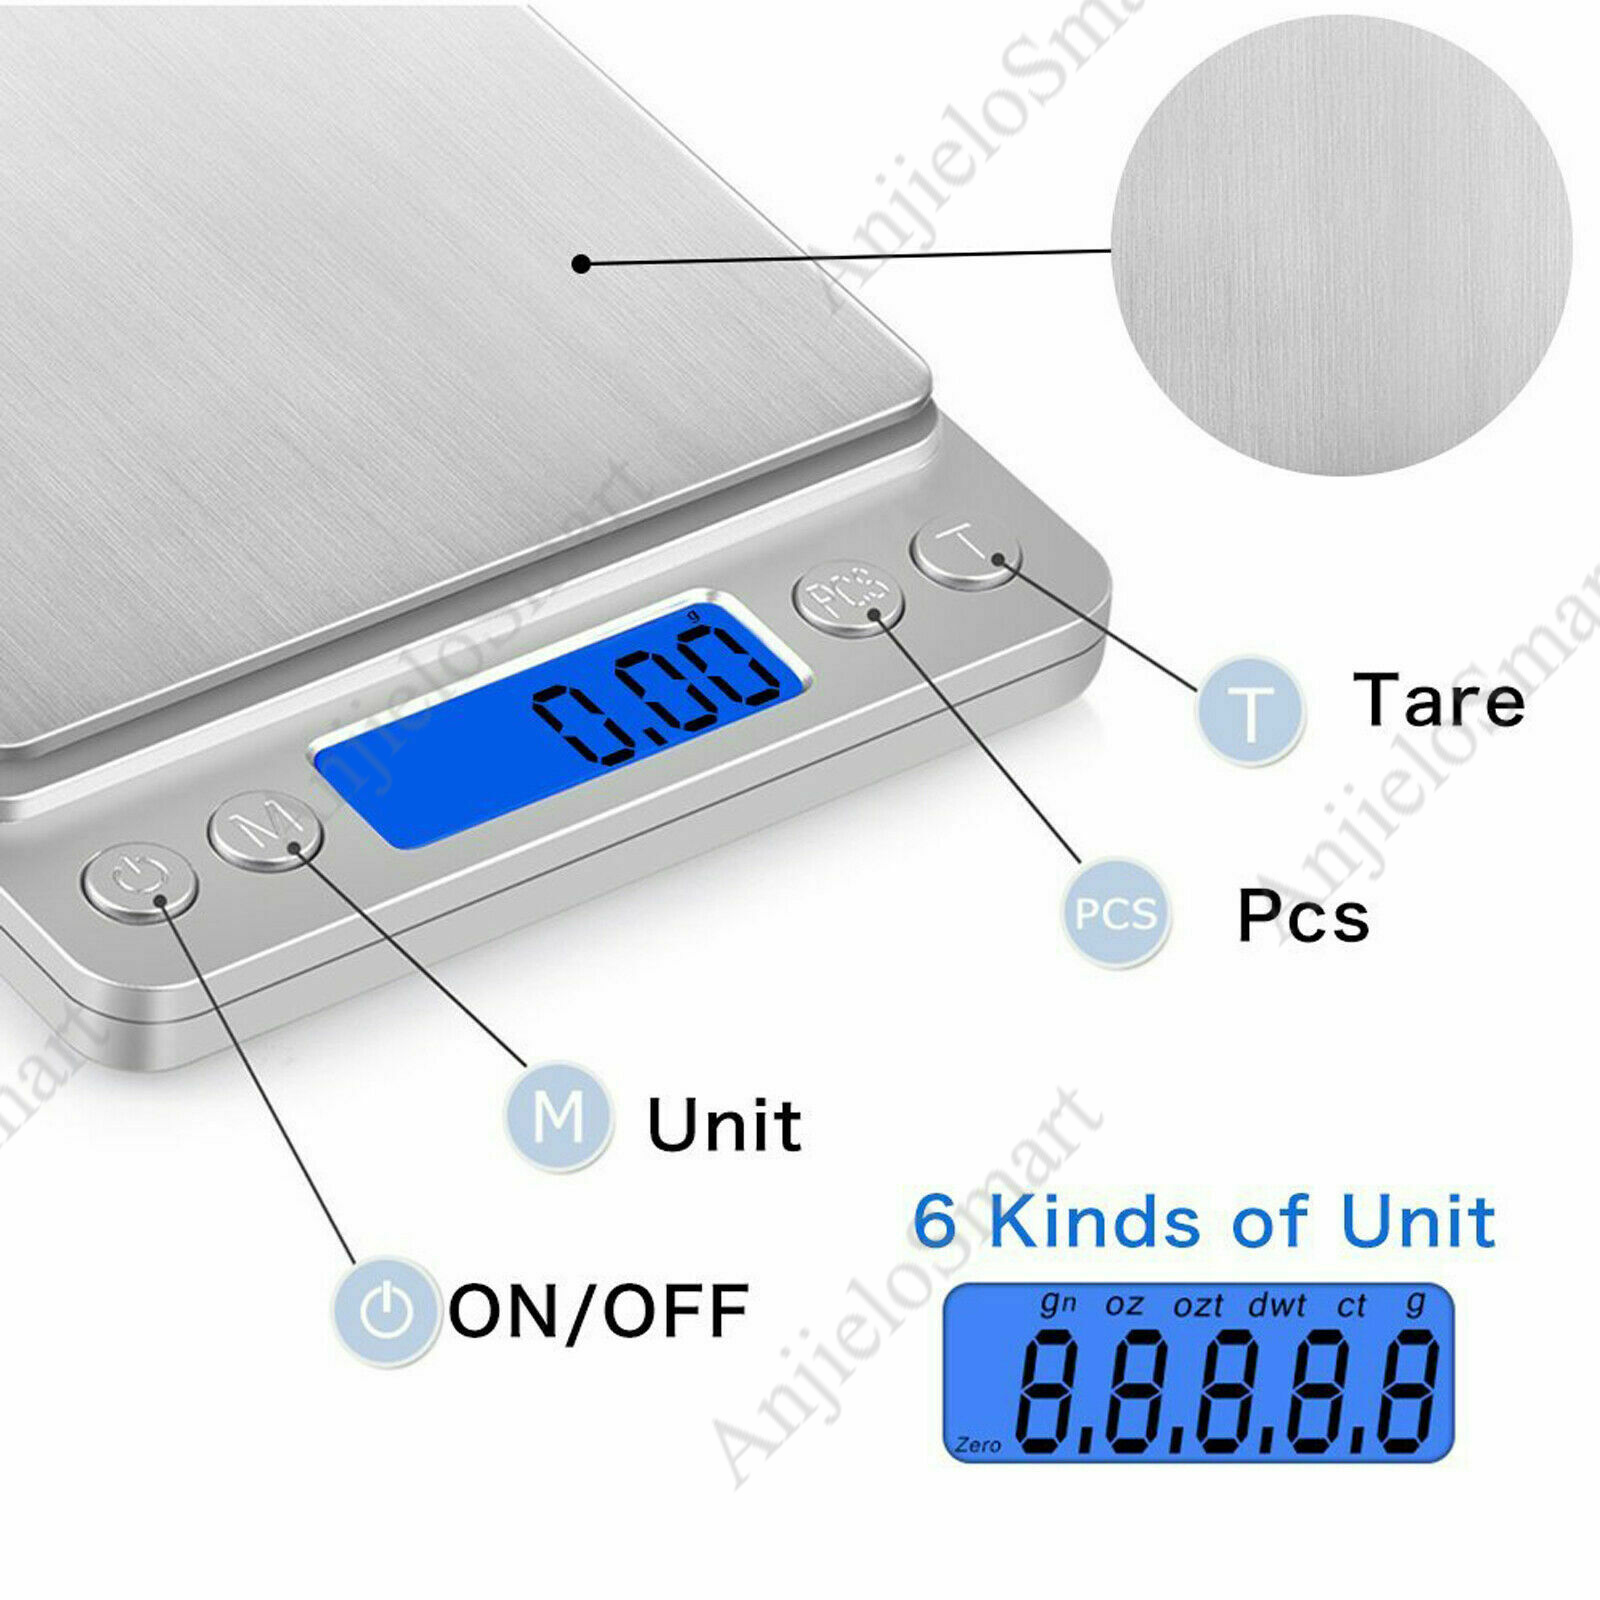 AnjieloSmart Kitchen Food Weight Scale New Electronic Digital Jewelry Scale for Mixer Kitchen Appliance